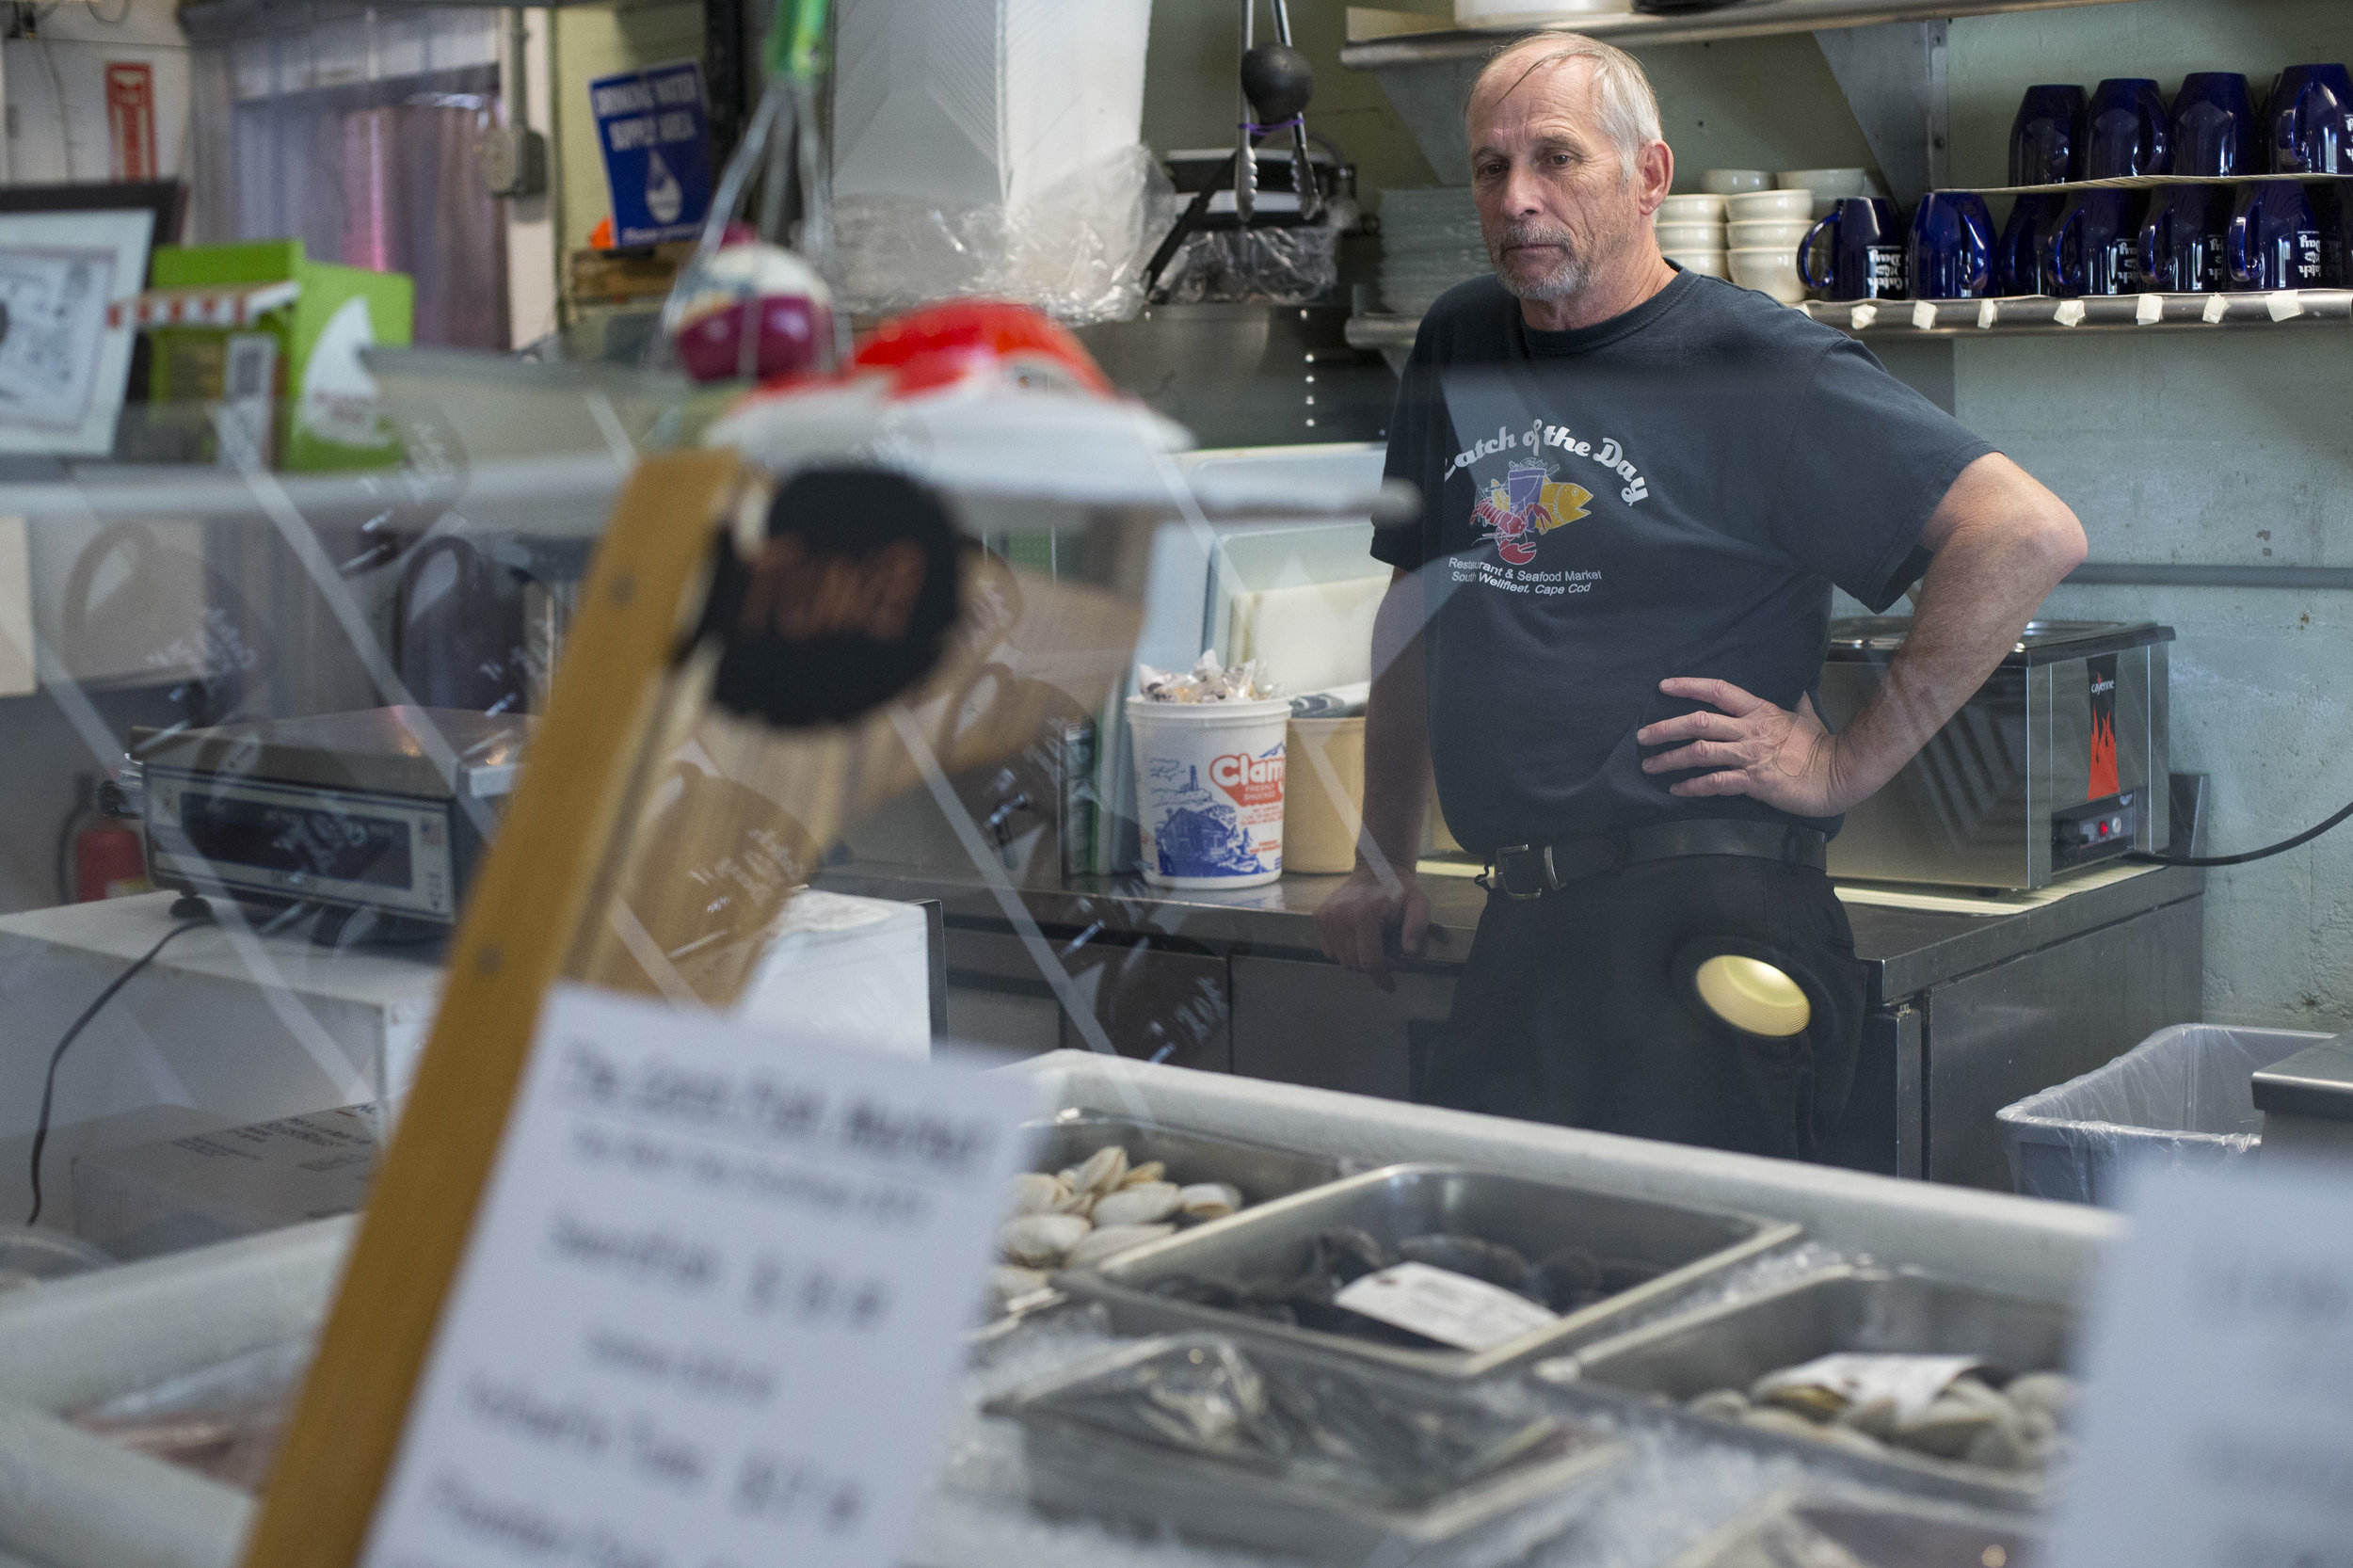  Chuck Fletcher, manager of Catch of the Day restaurant and seafood market, takes a quick break behind the counter of the seafood market in Wellfleet, Massachusetts on May 21, 2018. The business is one of many that are having difficulty finding seaso